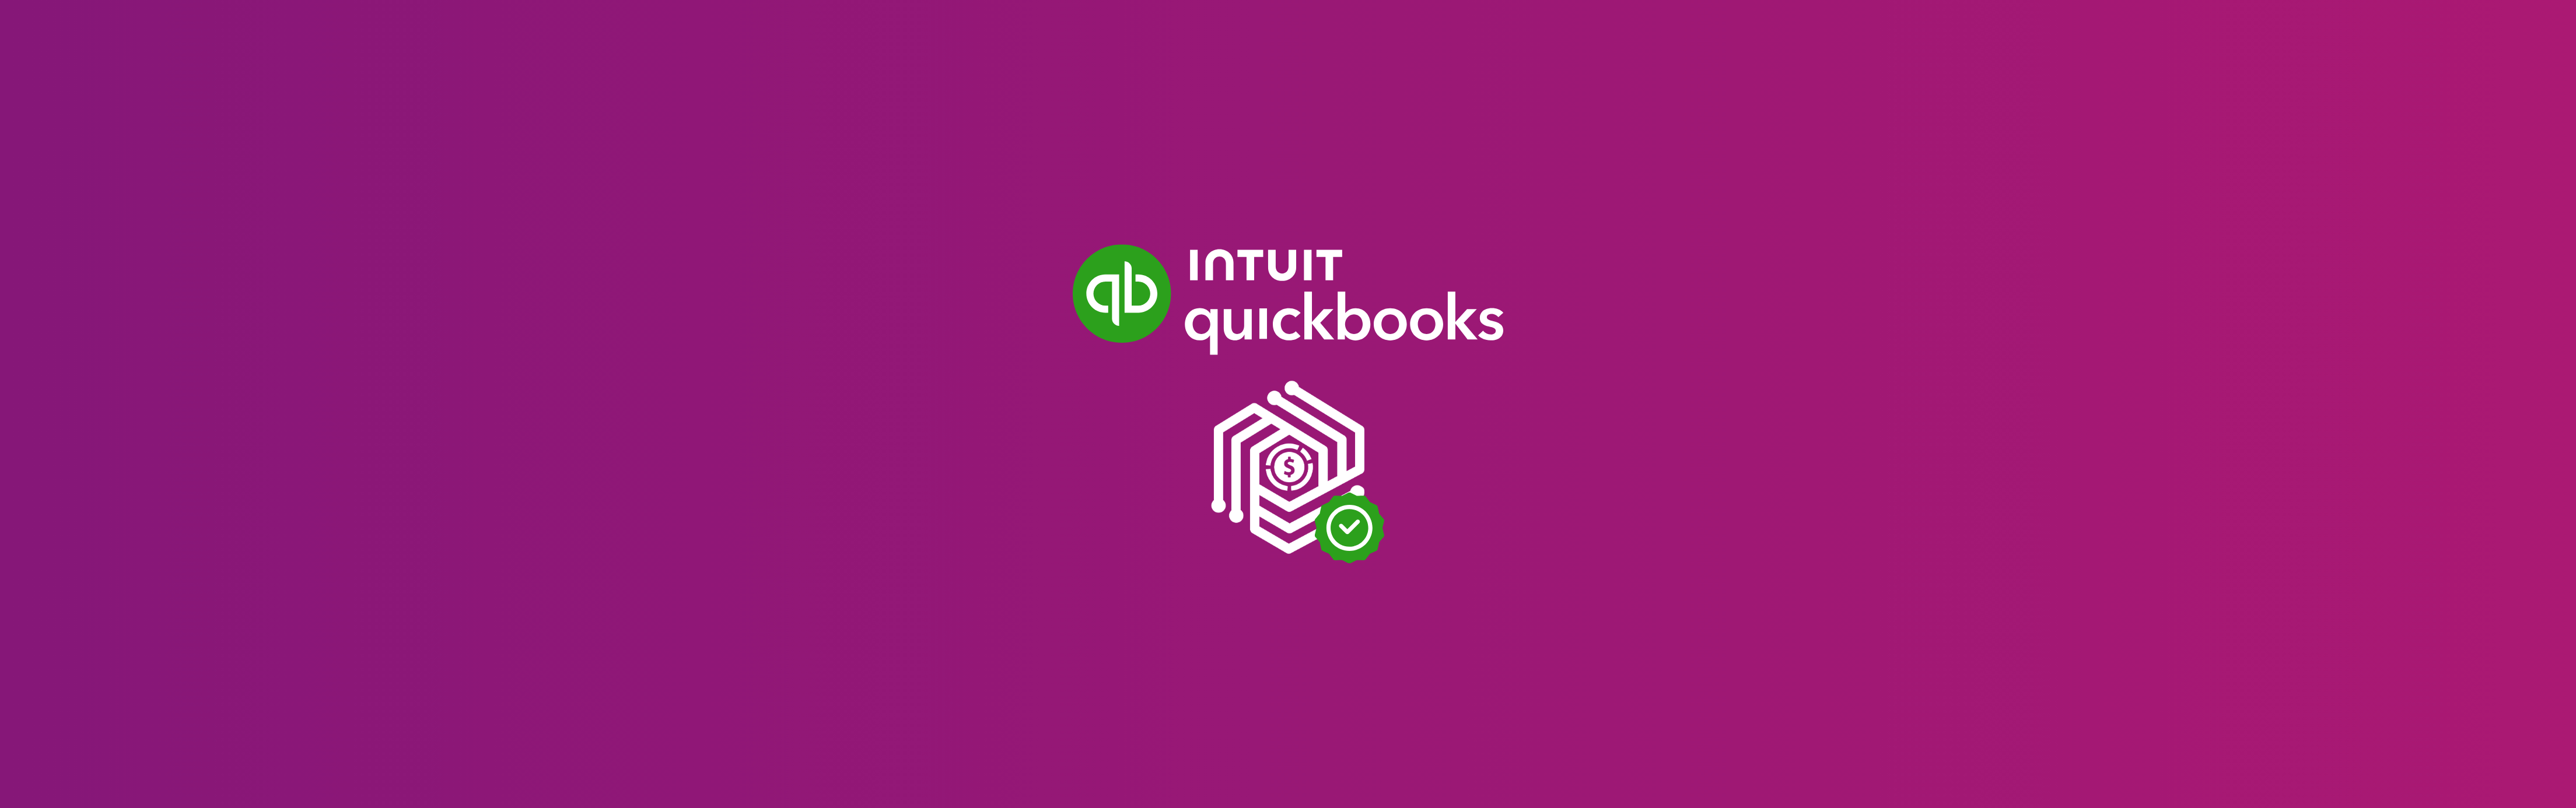 Synder Added to QuickBooks's Accountant Approved Bundles by Intuit